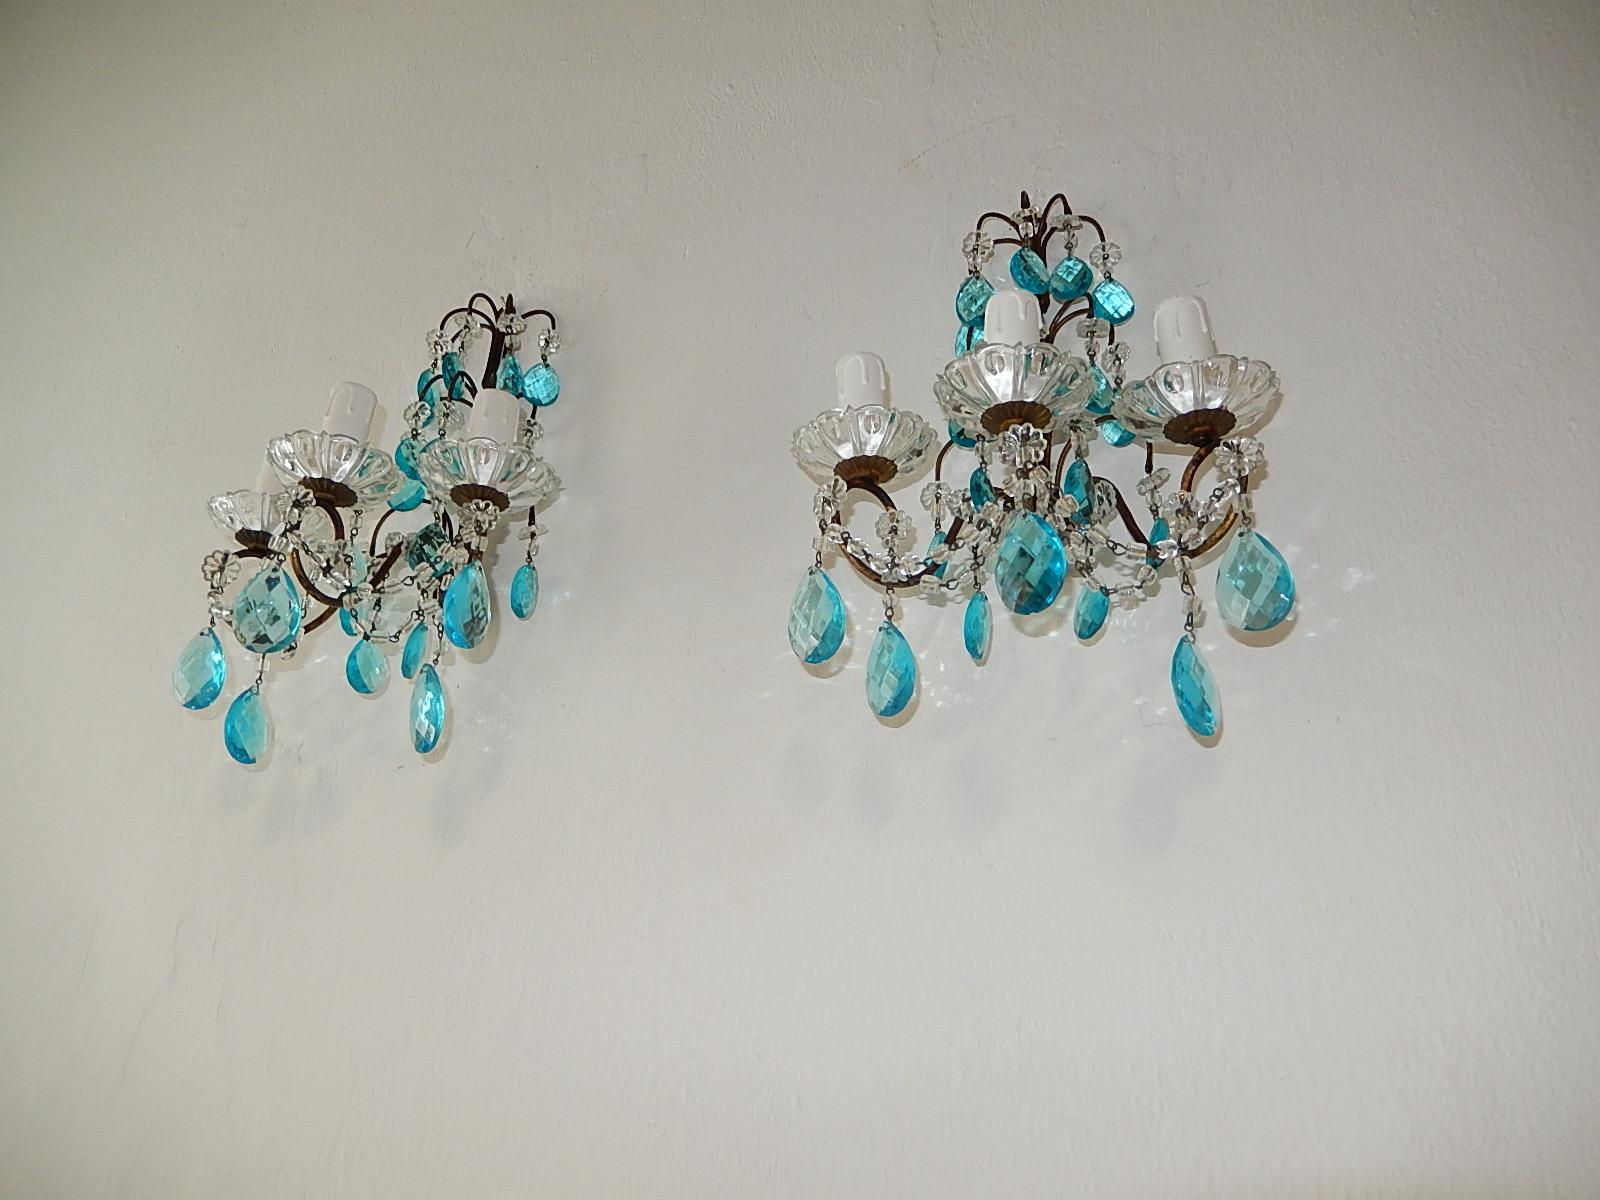 Housing three lights each, sitting in crystal bobeches. Will be rewired with certified US UL sockets for USA and appropriate sockets for all other countries and ready to hang.  Rare aqua blue crystal prisms, florets and swags of beads throughout.